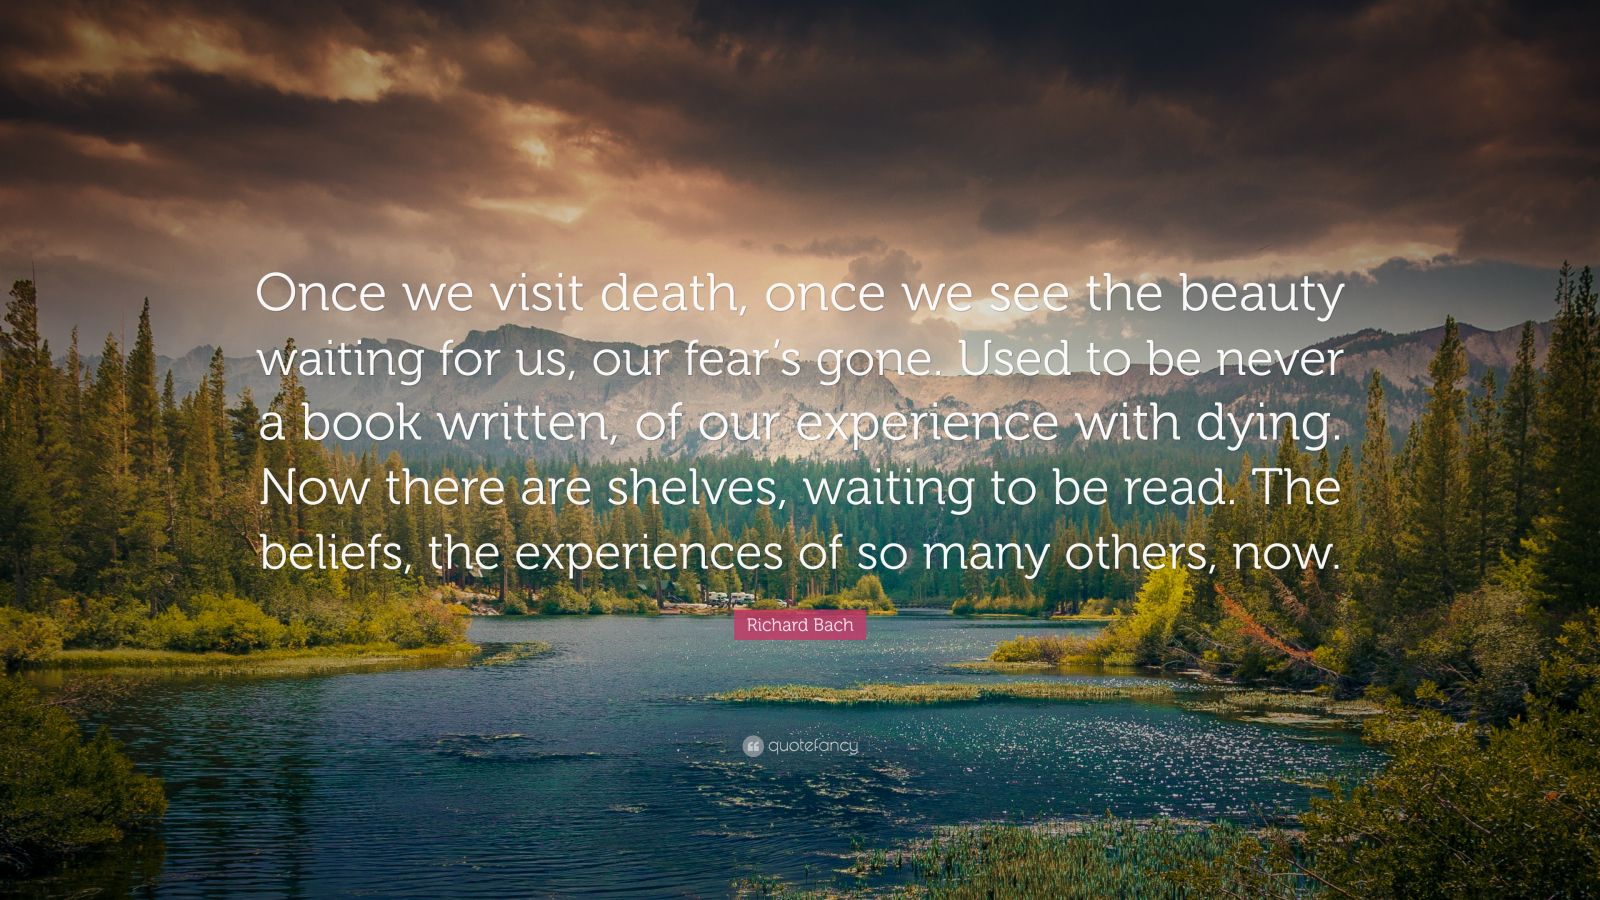 Richard Bach Quote: “Once we visit death, once we see the beauty ...